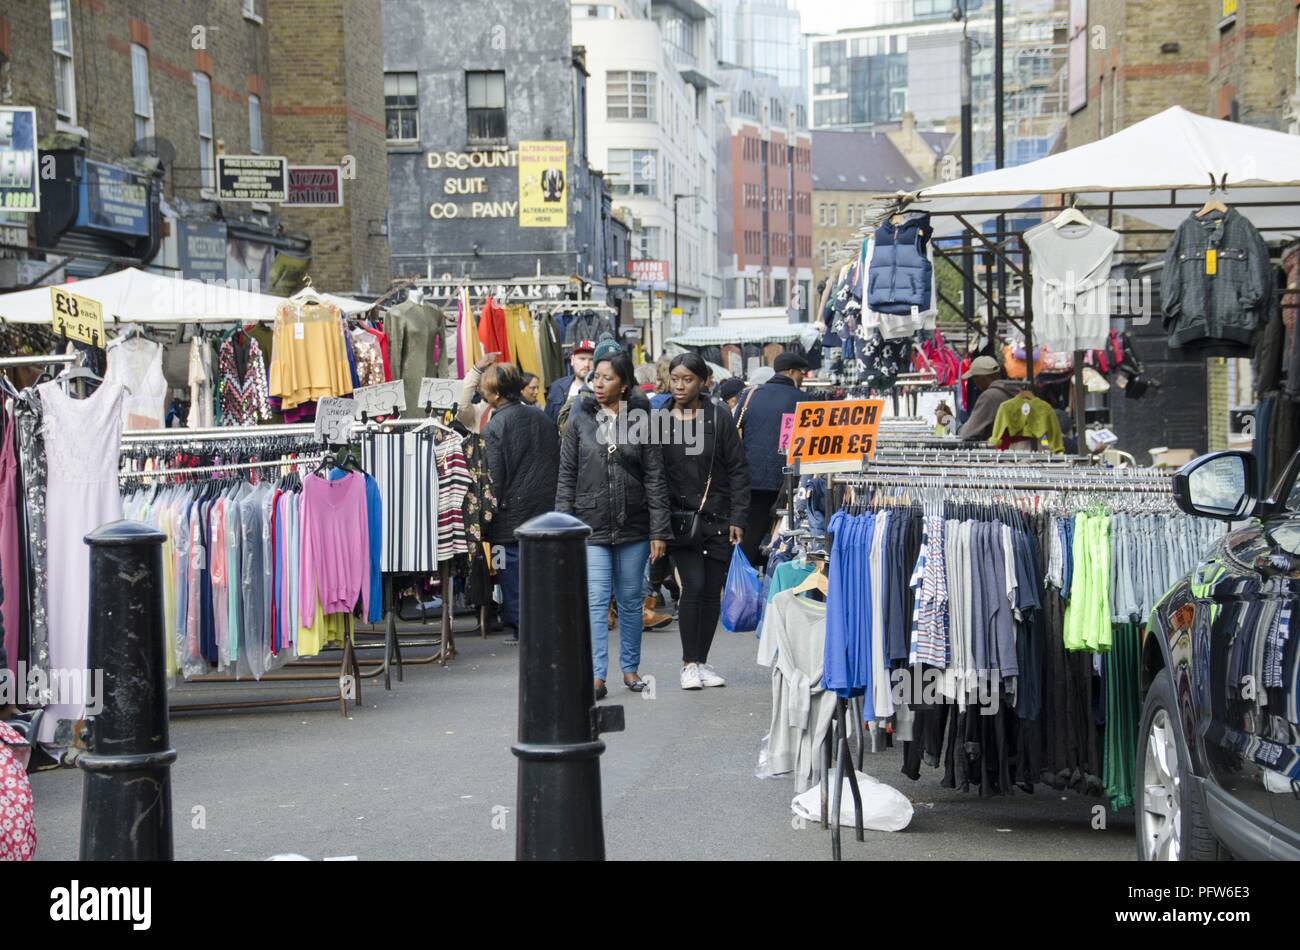 View of people walking between outdoor racks of clothing that line a pedestrian street at Petticoat Lane Market, located in the East End, in London, England, October 29, 2017. () Stock Photo